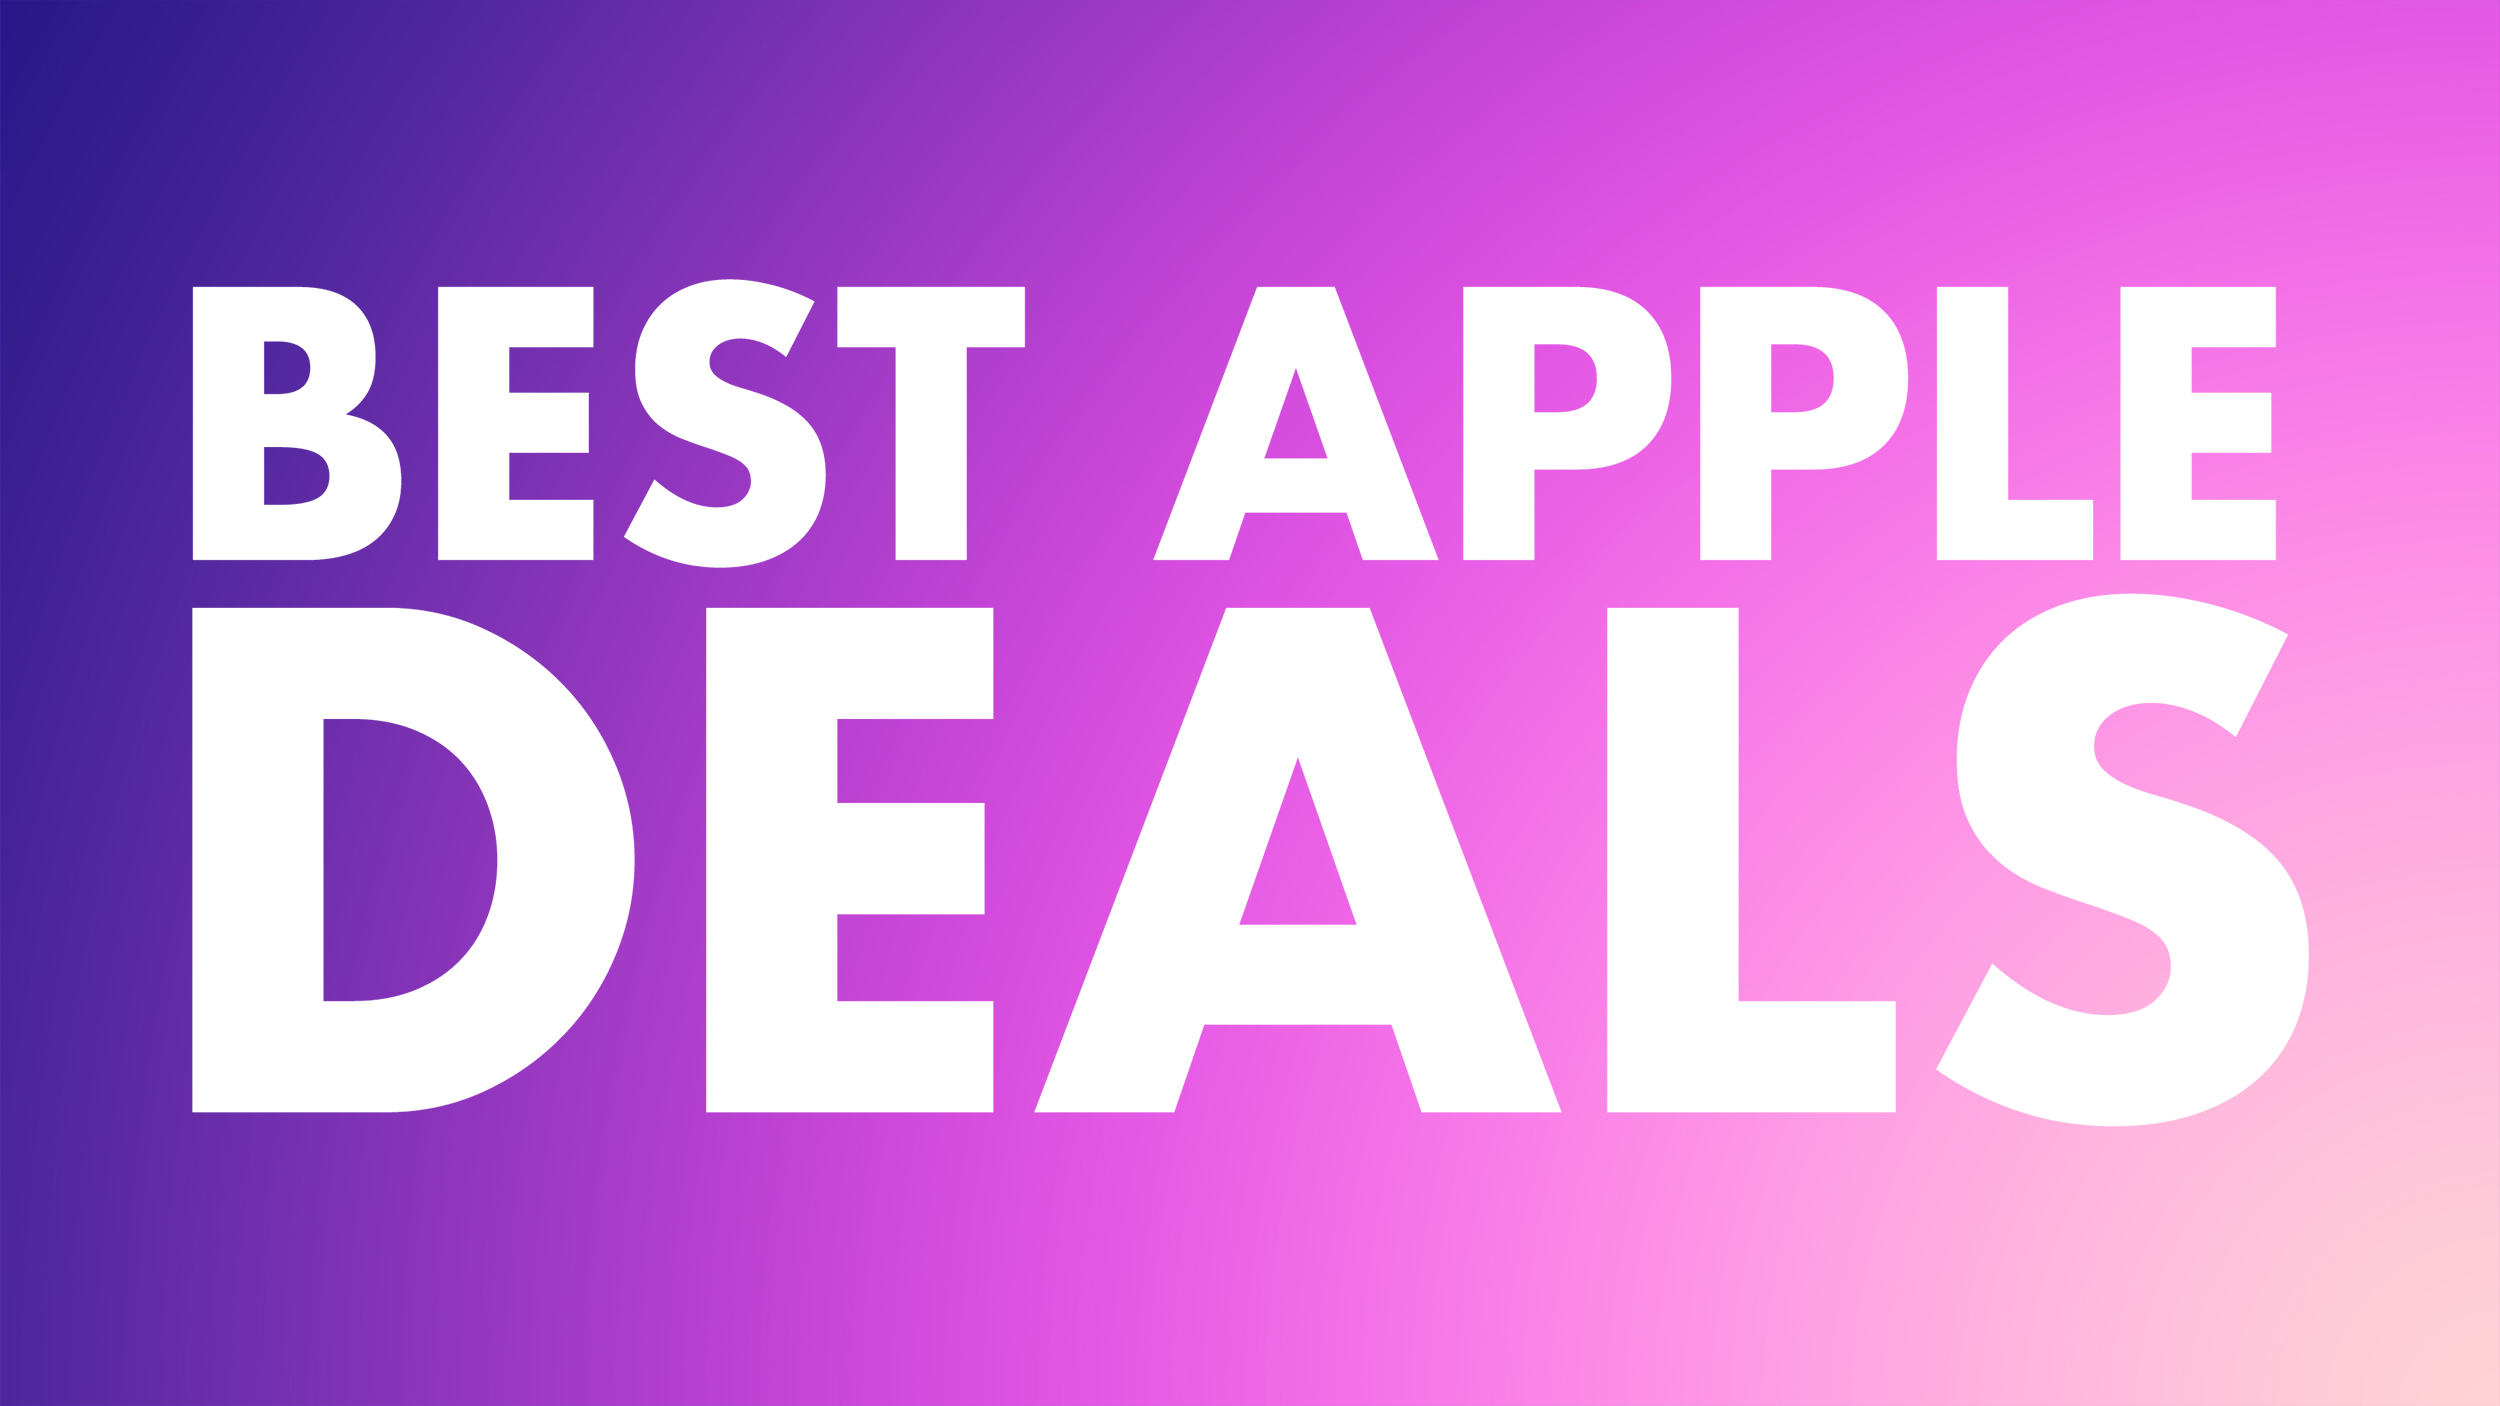 Best Apple Deals of the Week: Samsung's Smart Monitor M8 Gets Massive $250 Discount, Along With Year's Best AirPods…